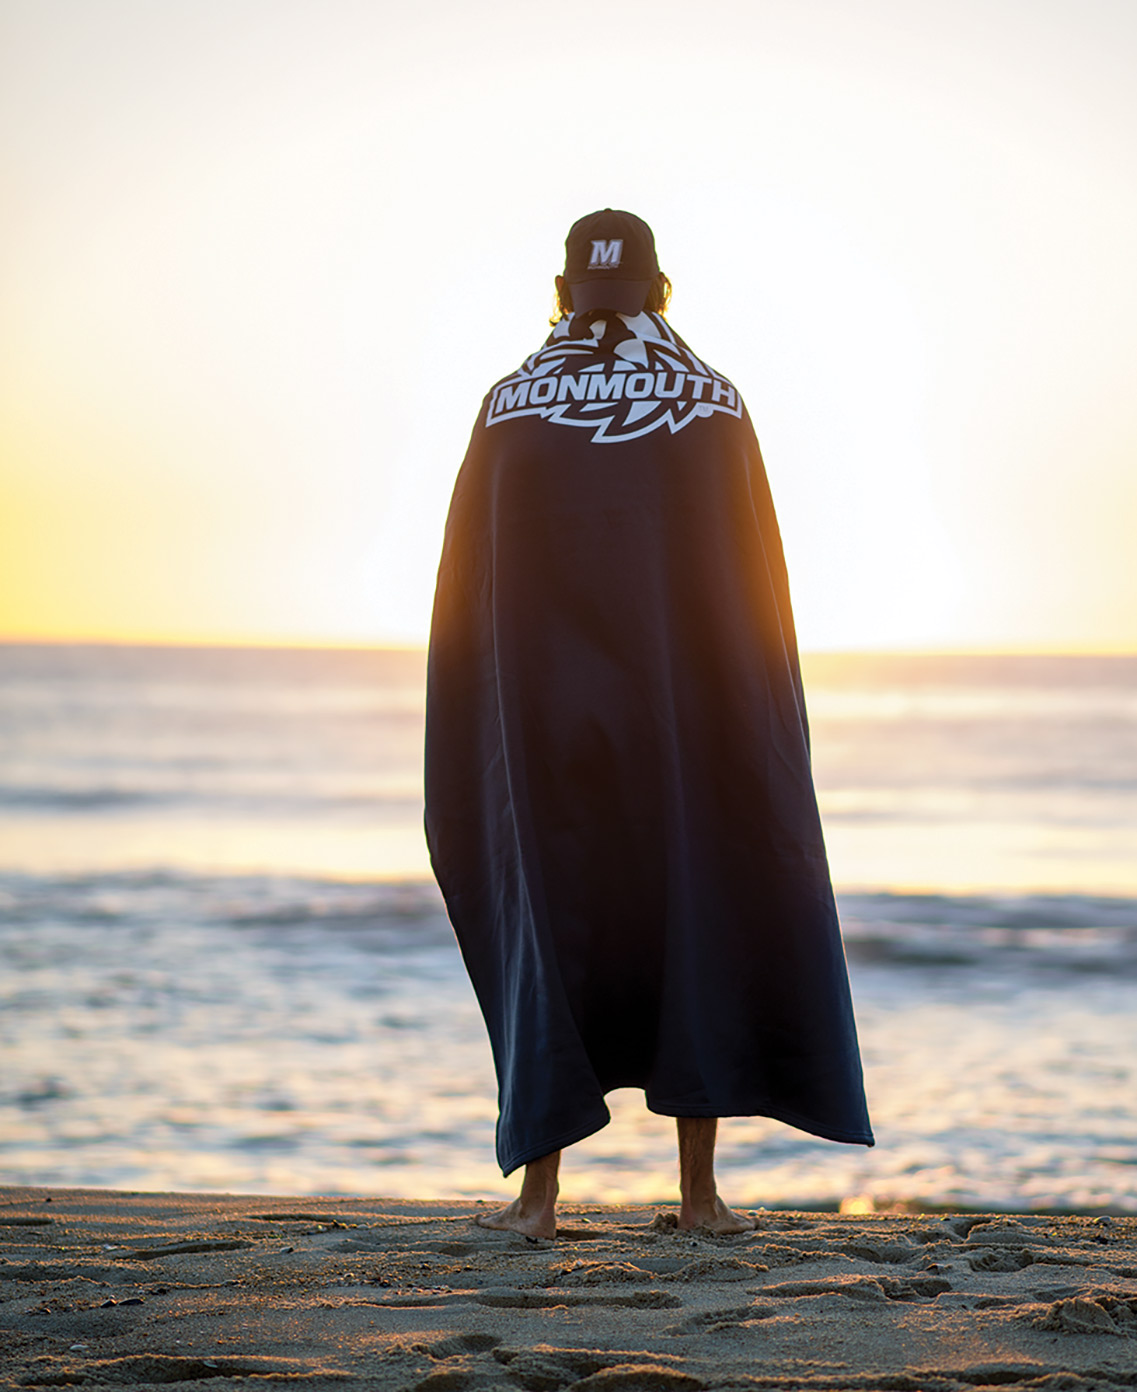 A portrait photograph of a Monmouth University student standing and posing for a picture with his beach towel over his back as he looks upon the sunset at the beach